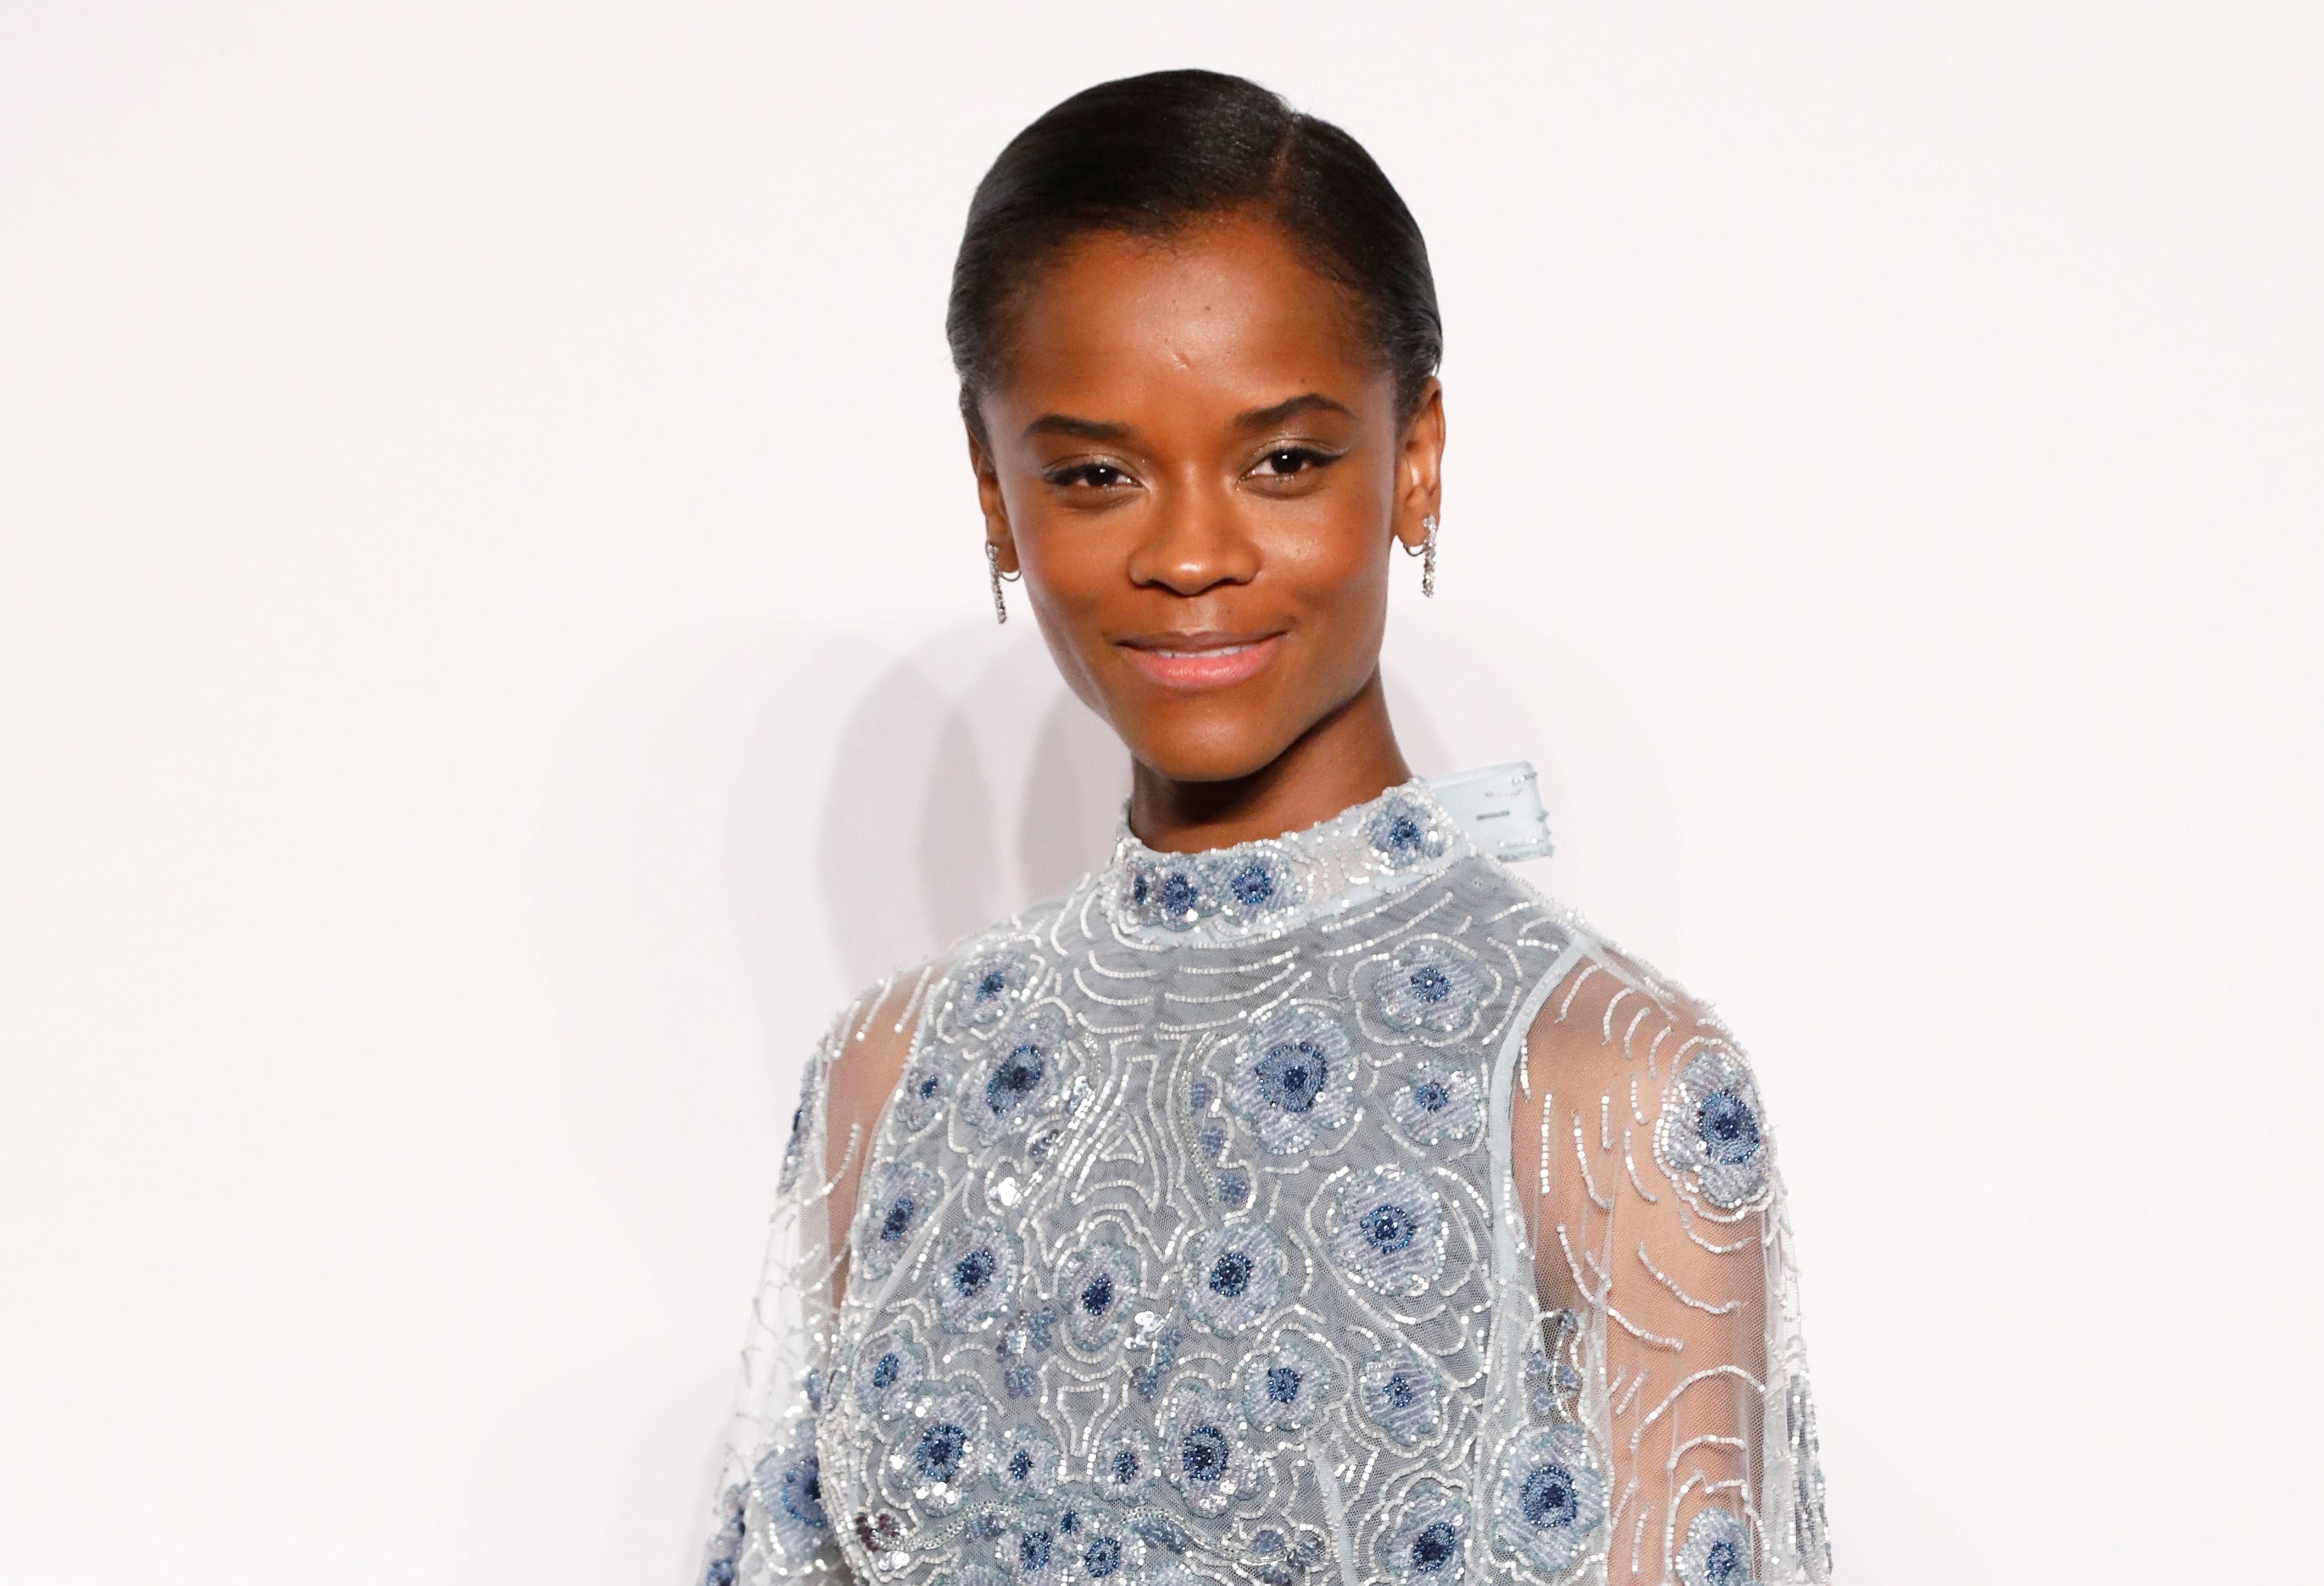 ‘Black Panther’ actor Letitia Wright was criticised after sharing an anti-vax video